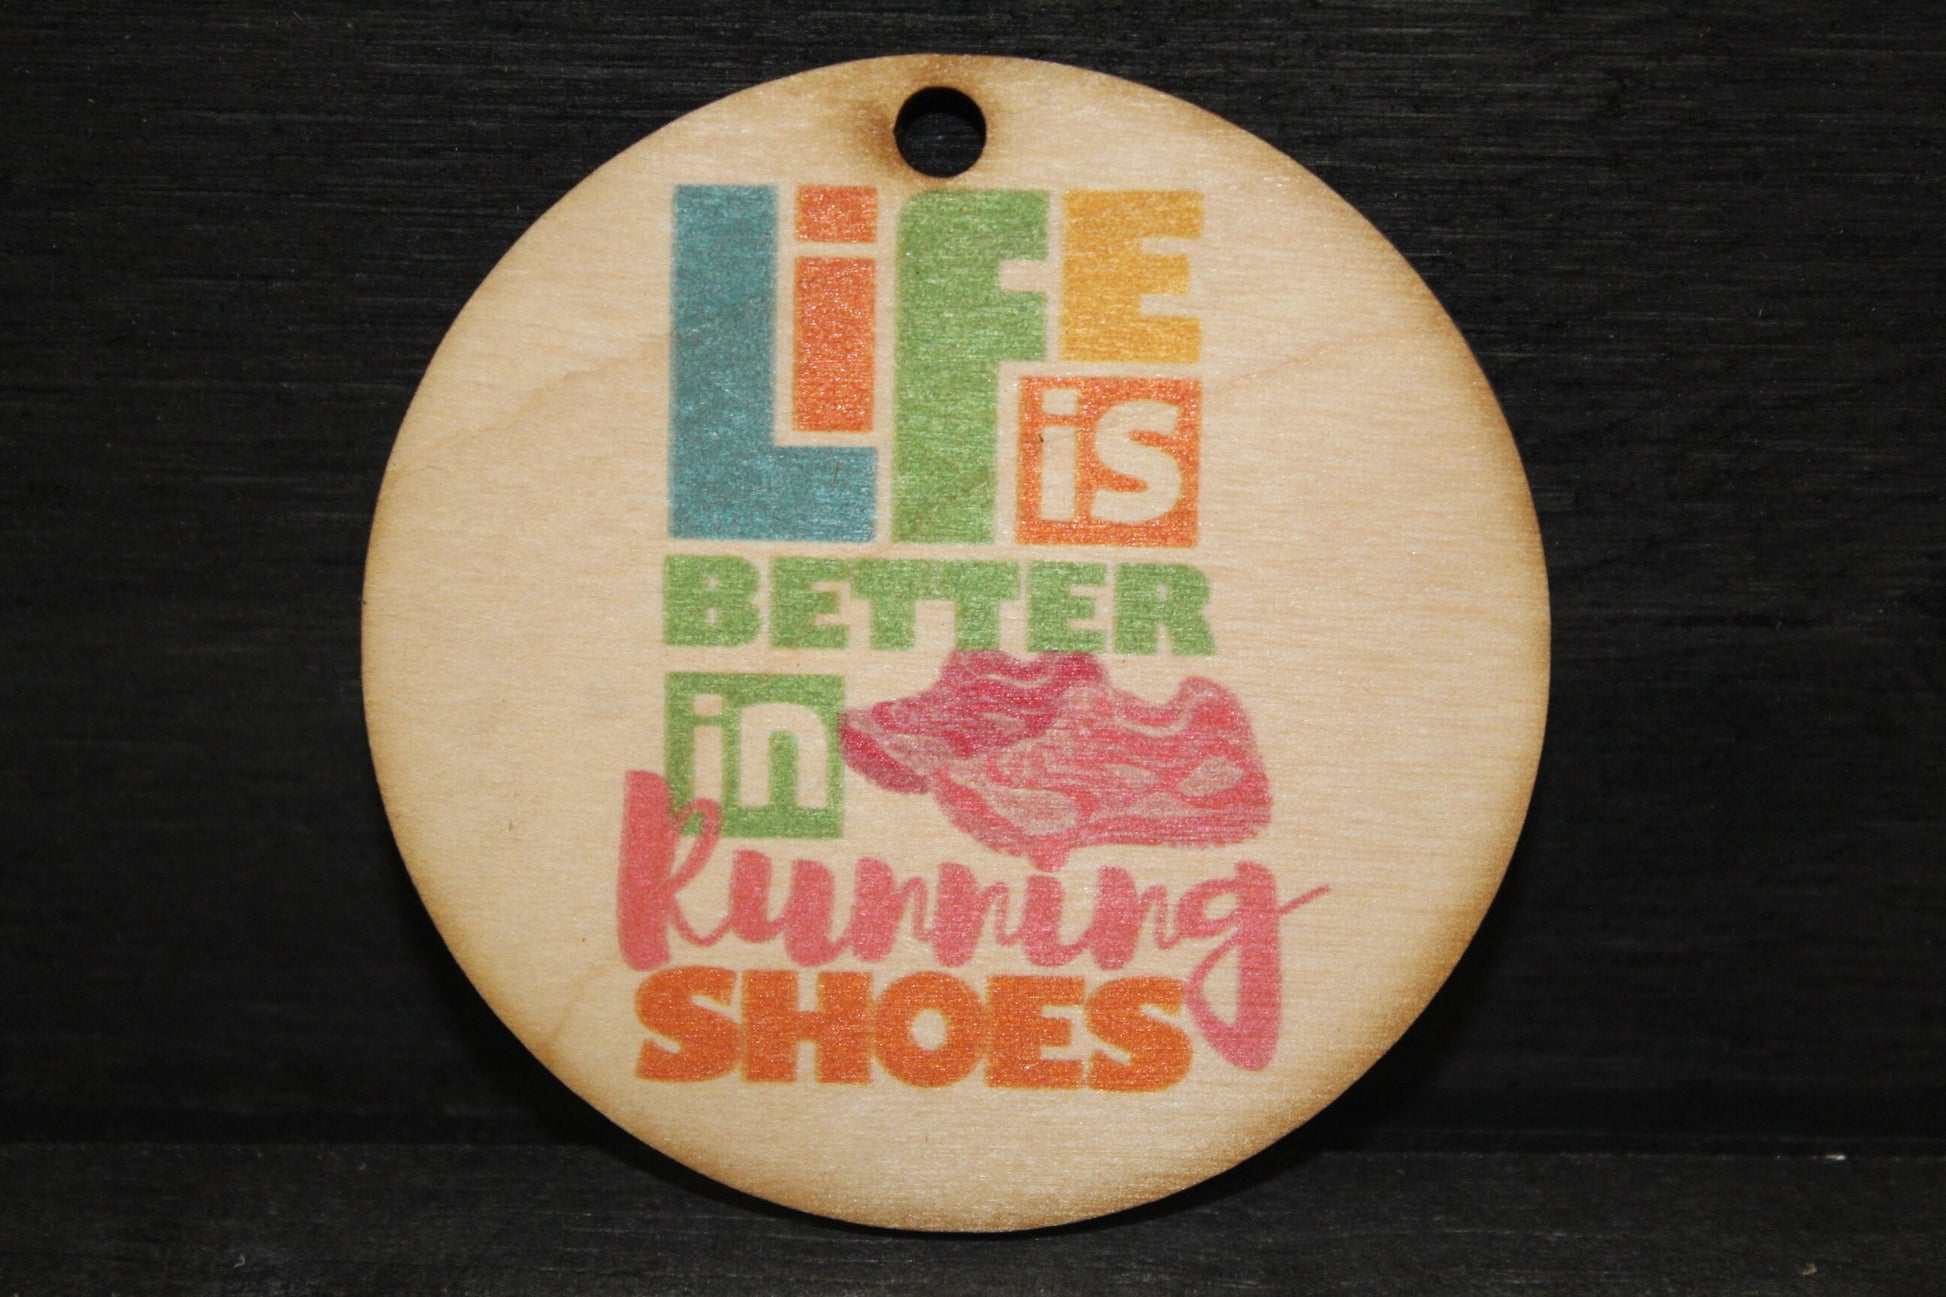 Life Is Better In Running Shoes Track and Field Race Runner Gift Tag Christmas Ornament Award WoodSlice Tennis Shoes Work Out KeyChain